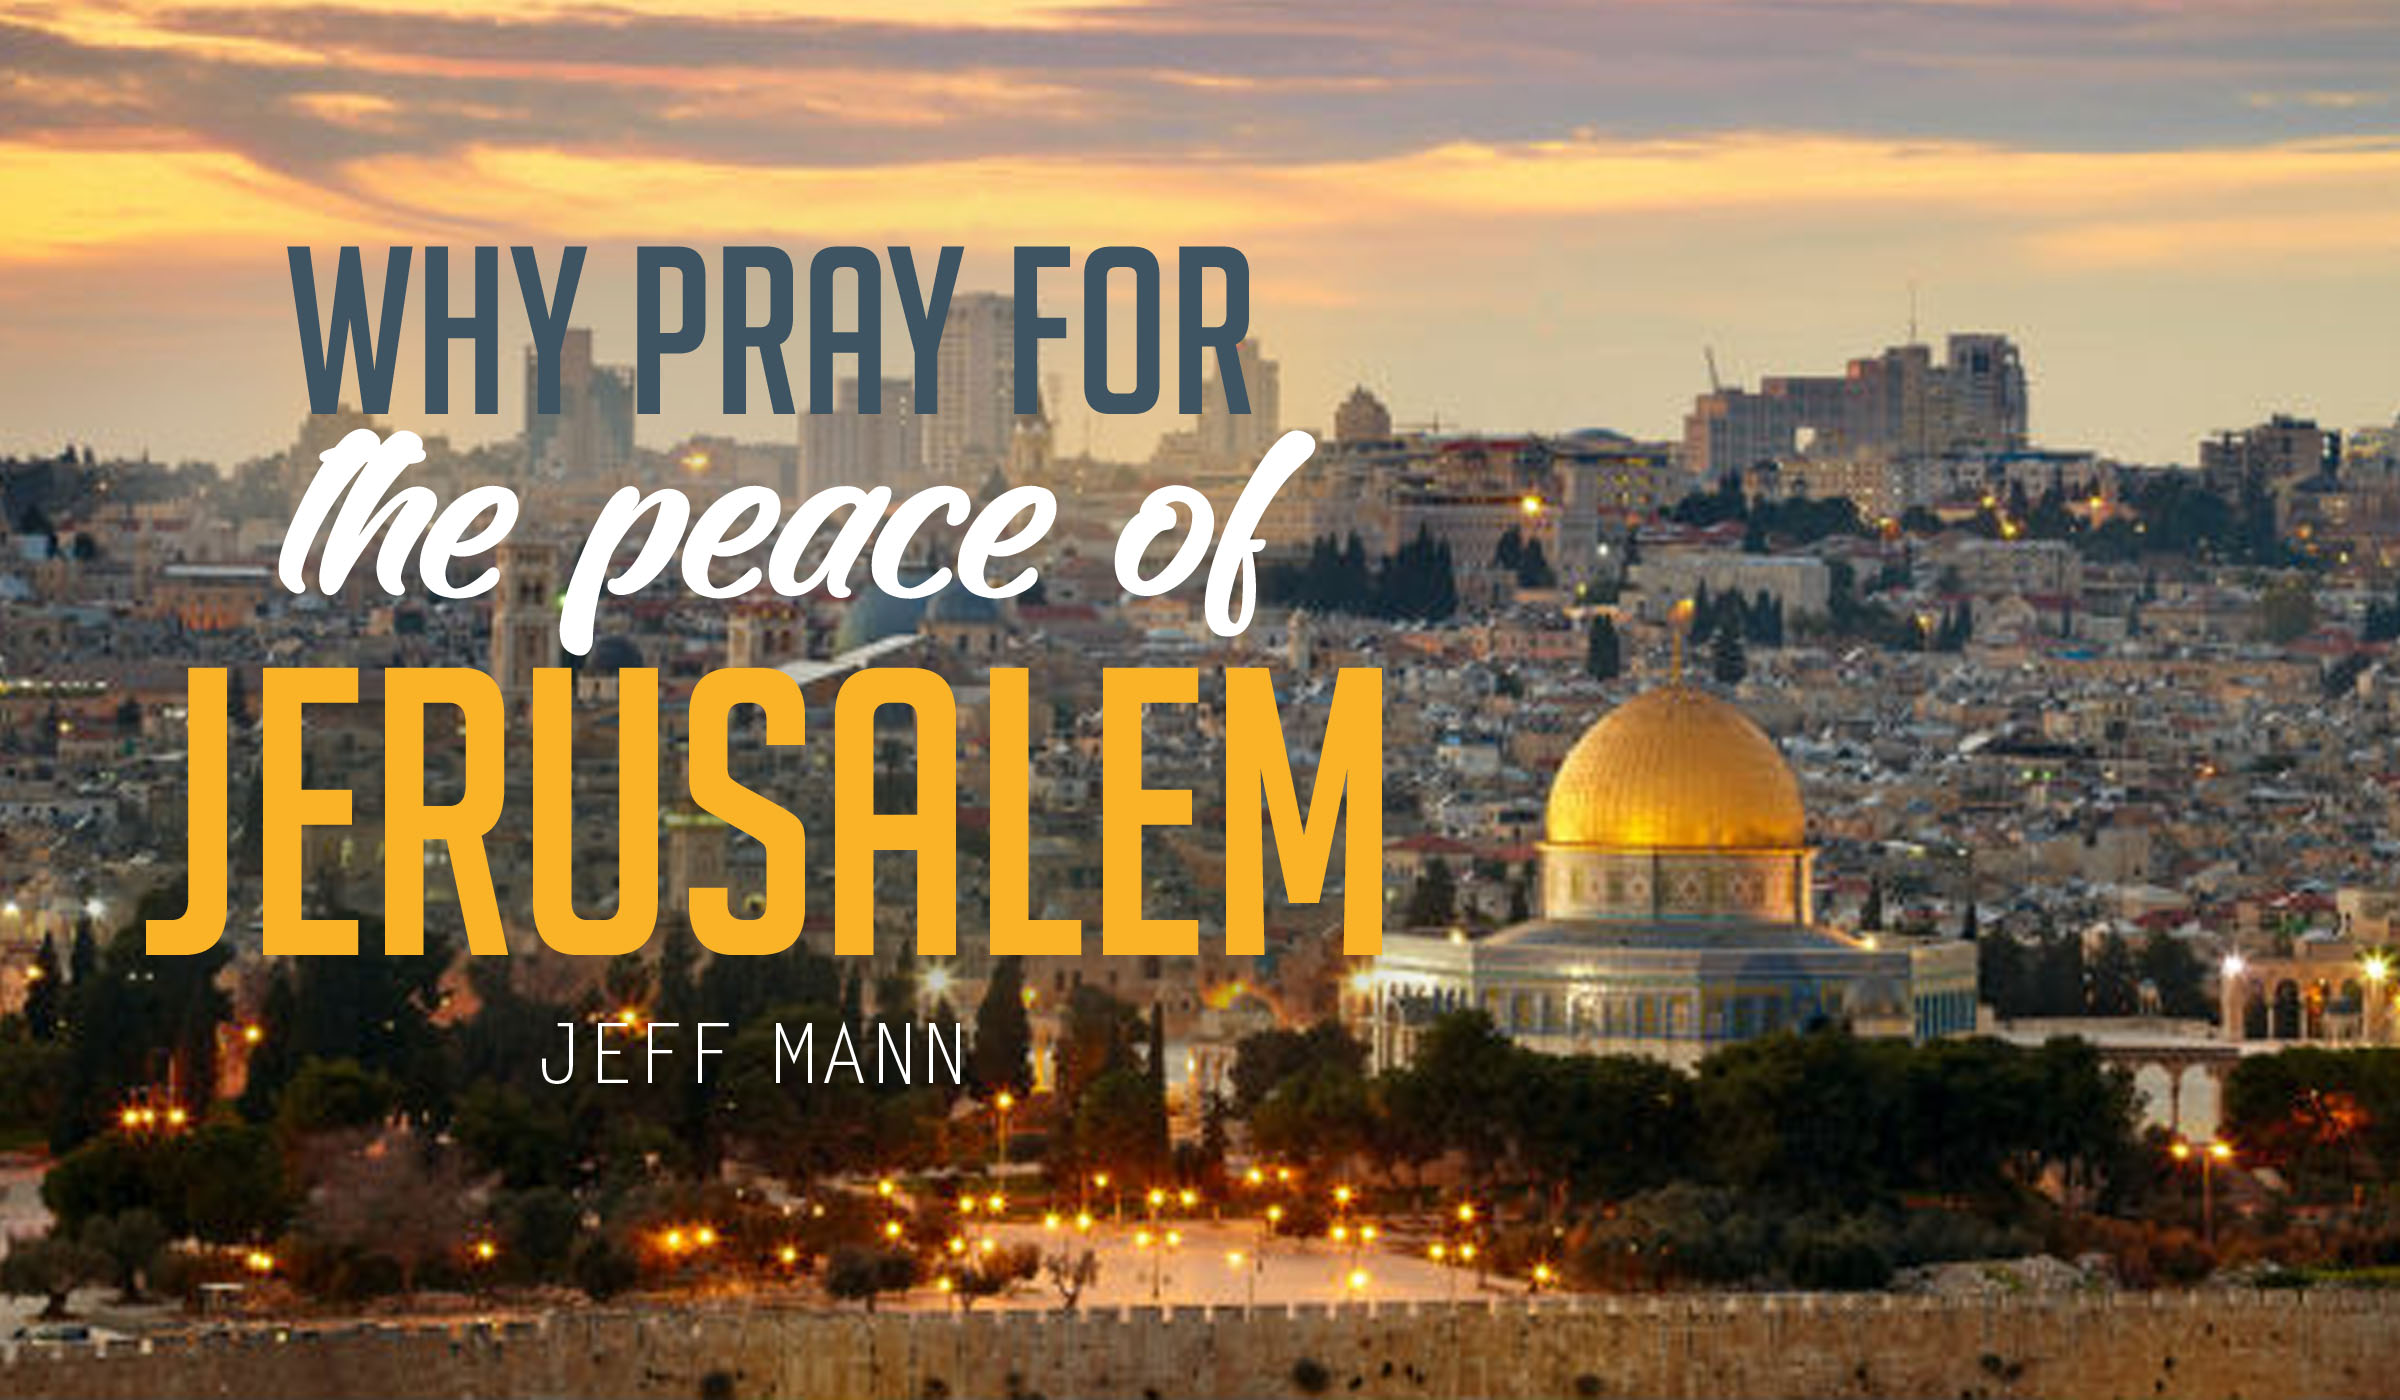 Why Pray for the Peace of Jerusalem?